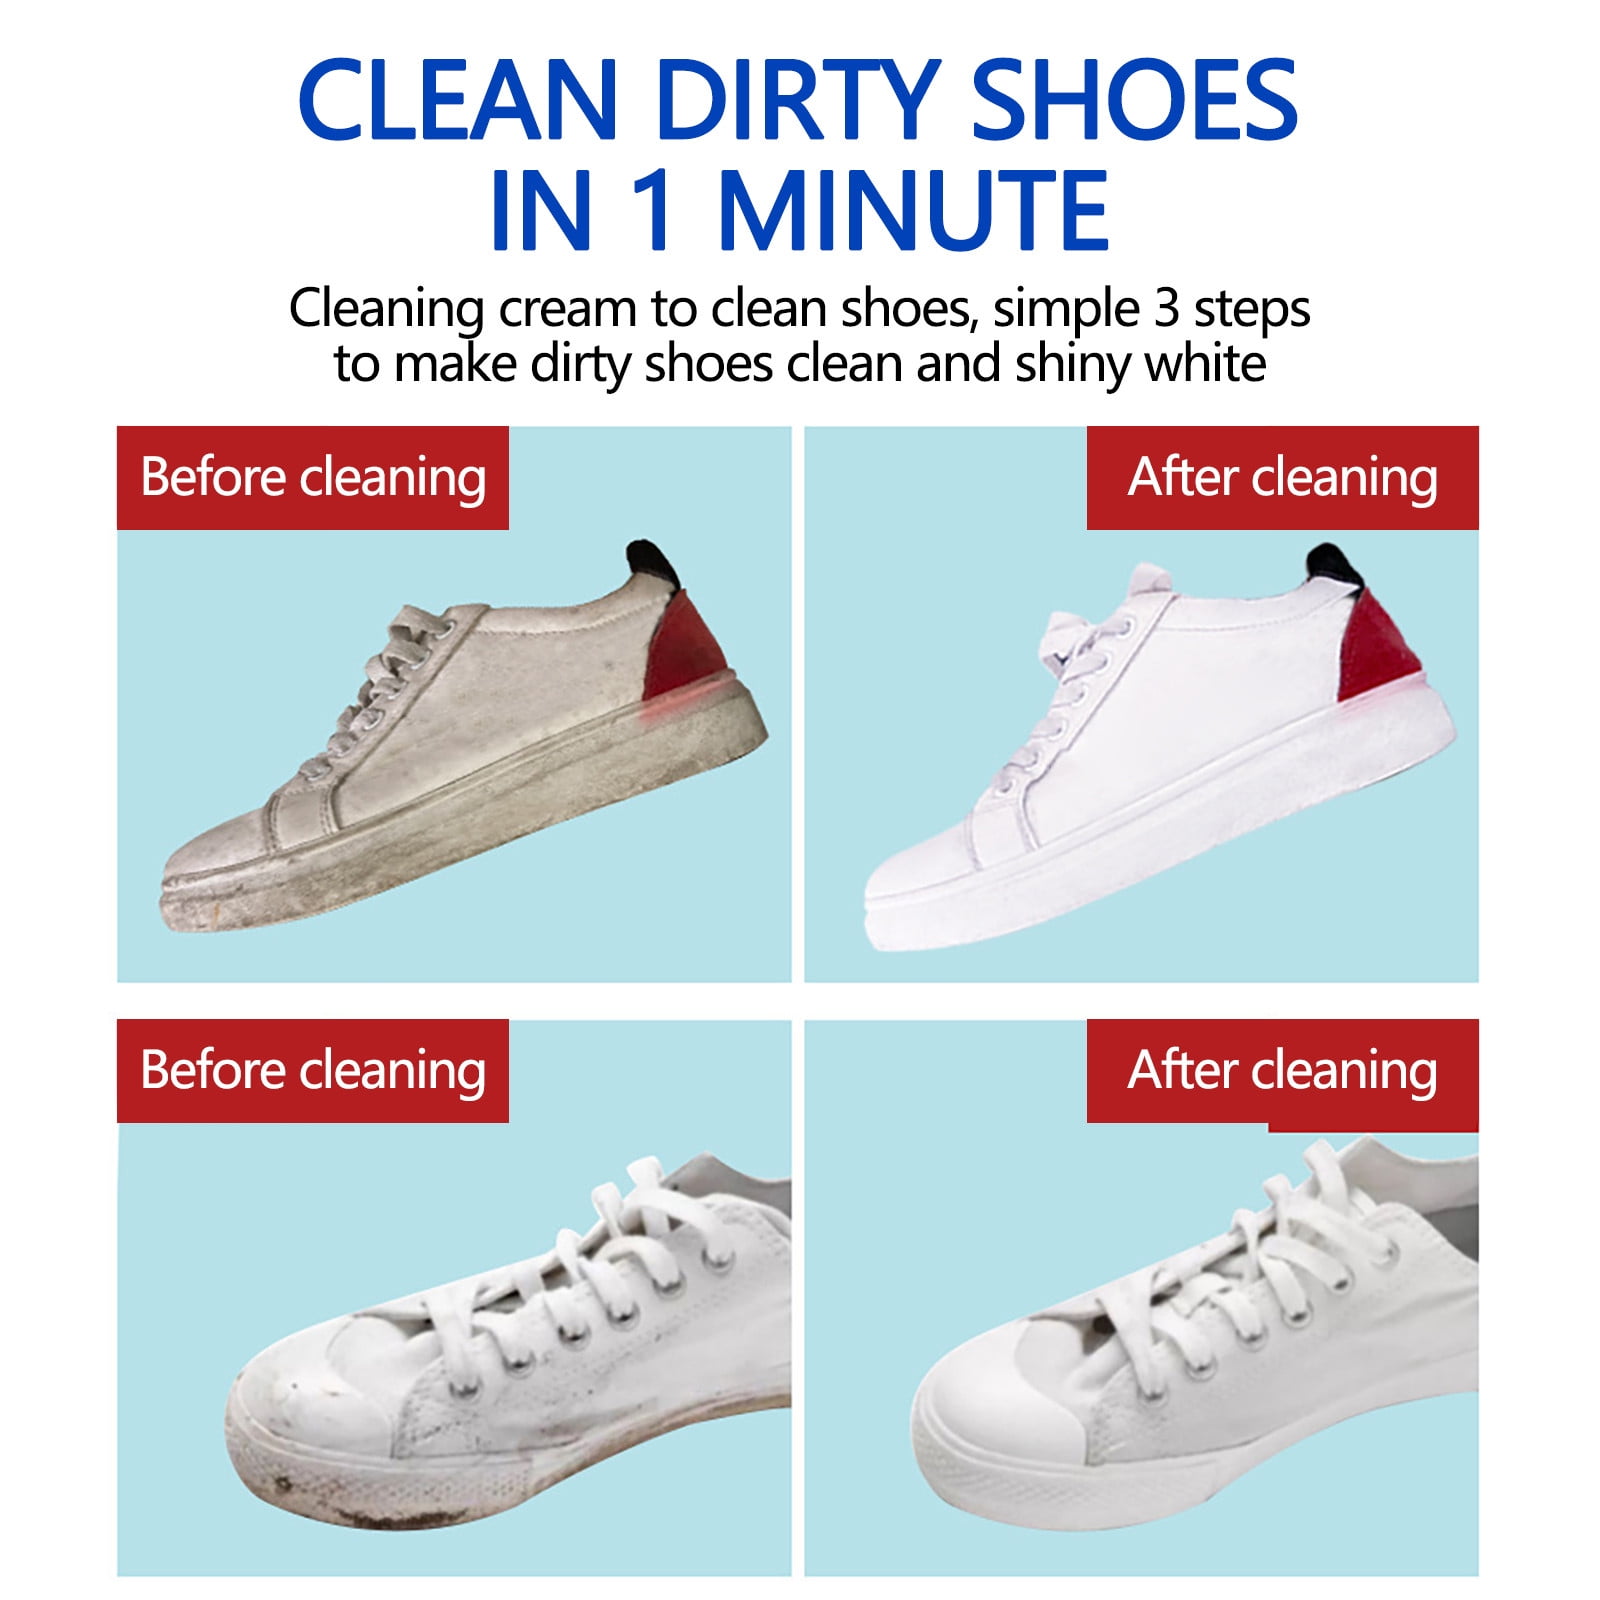 Shoes Multifunctional Cleaning Cream,Sneaker Erasers，White Shoe  Cleaner,Leather Shoe Cleaner,White Shoe Cleaning Cream with Sponge Eraser  (1pcs)